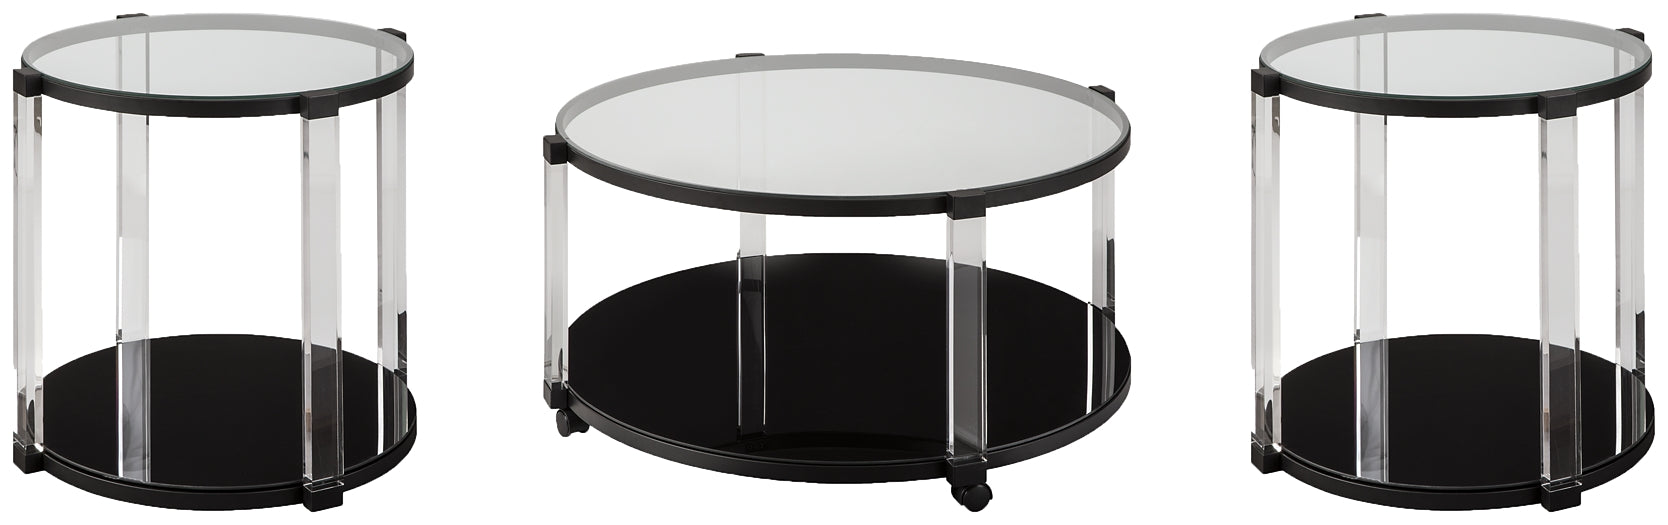 Delsiny Signature Design 3-Piece Occasional Table Package